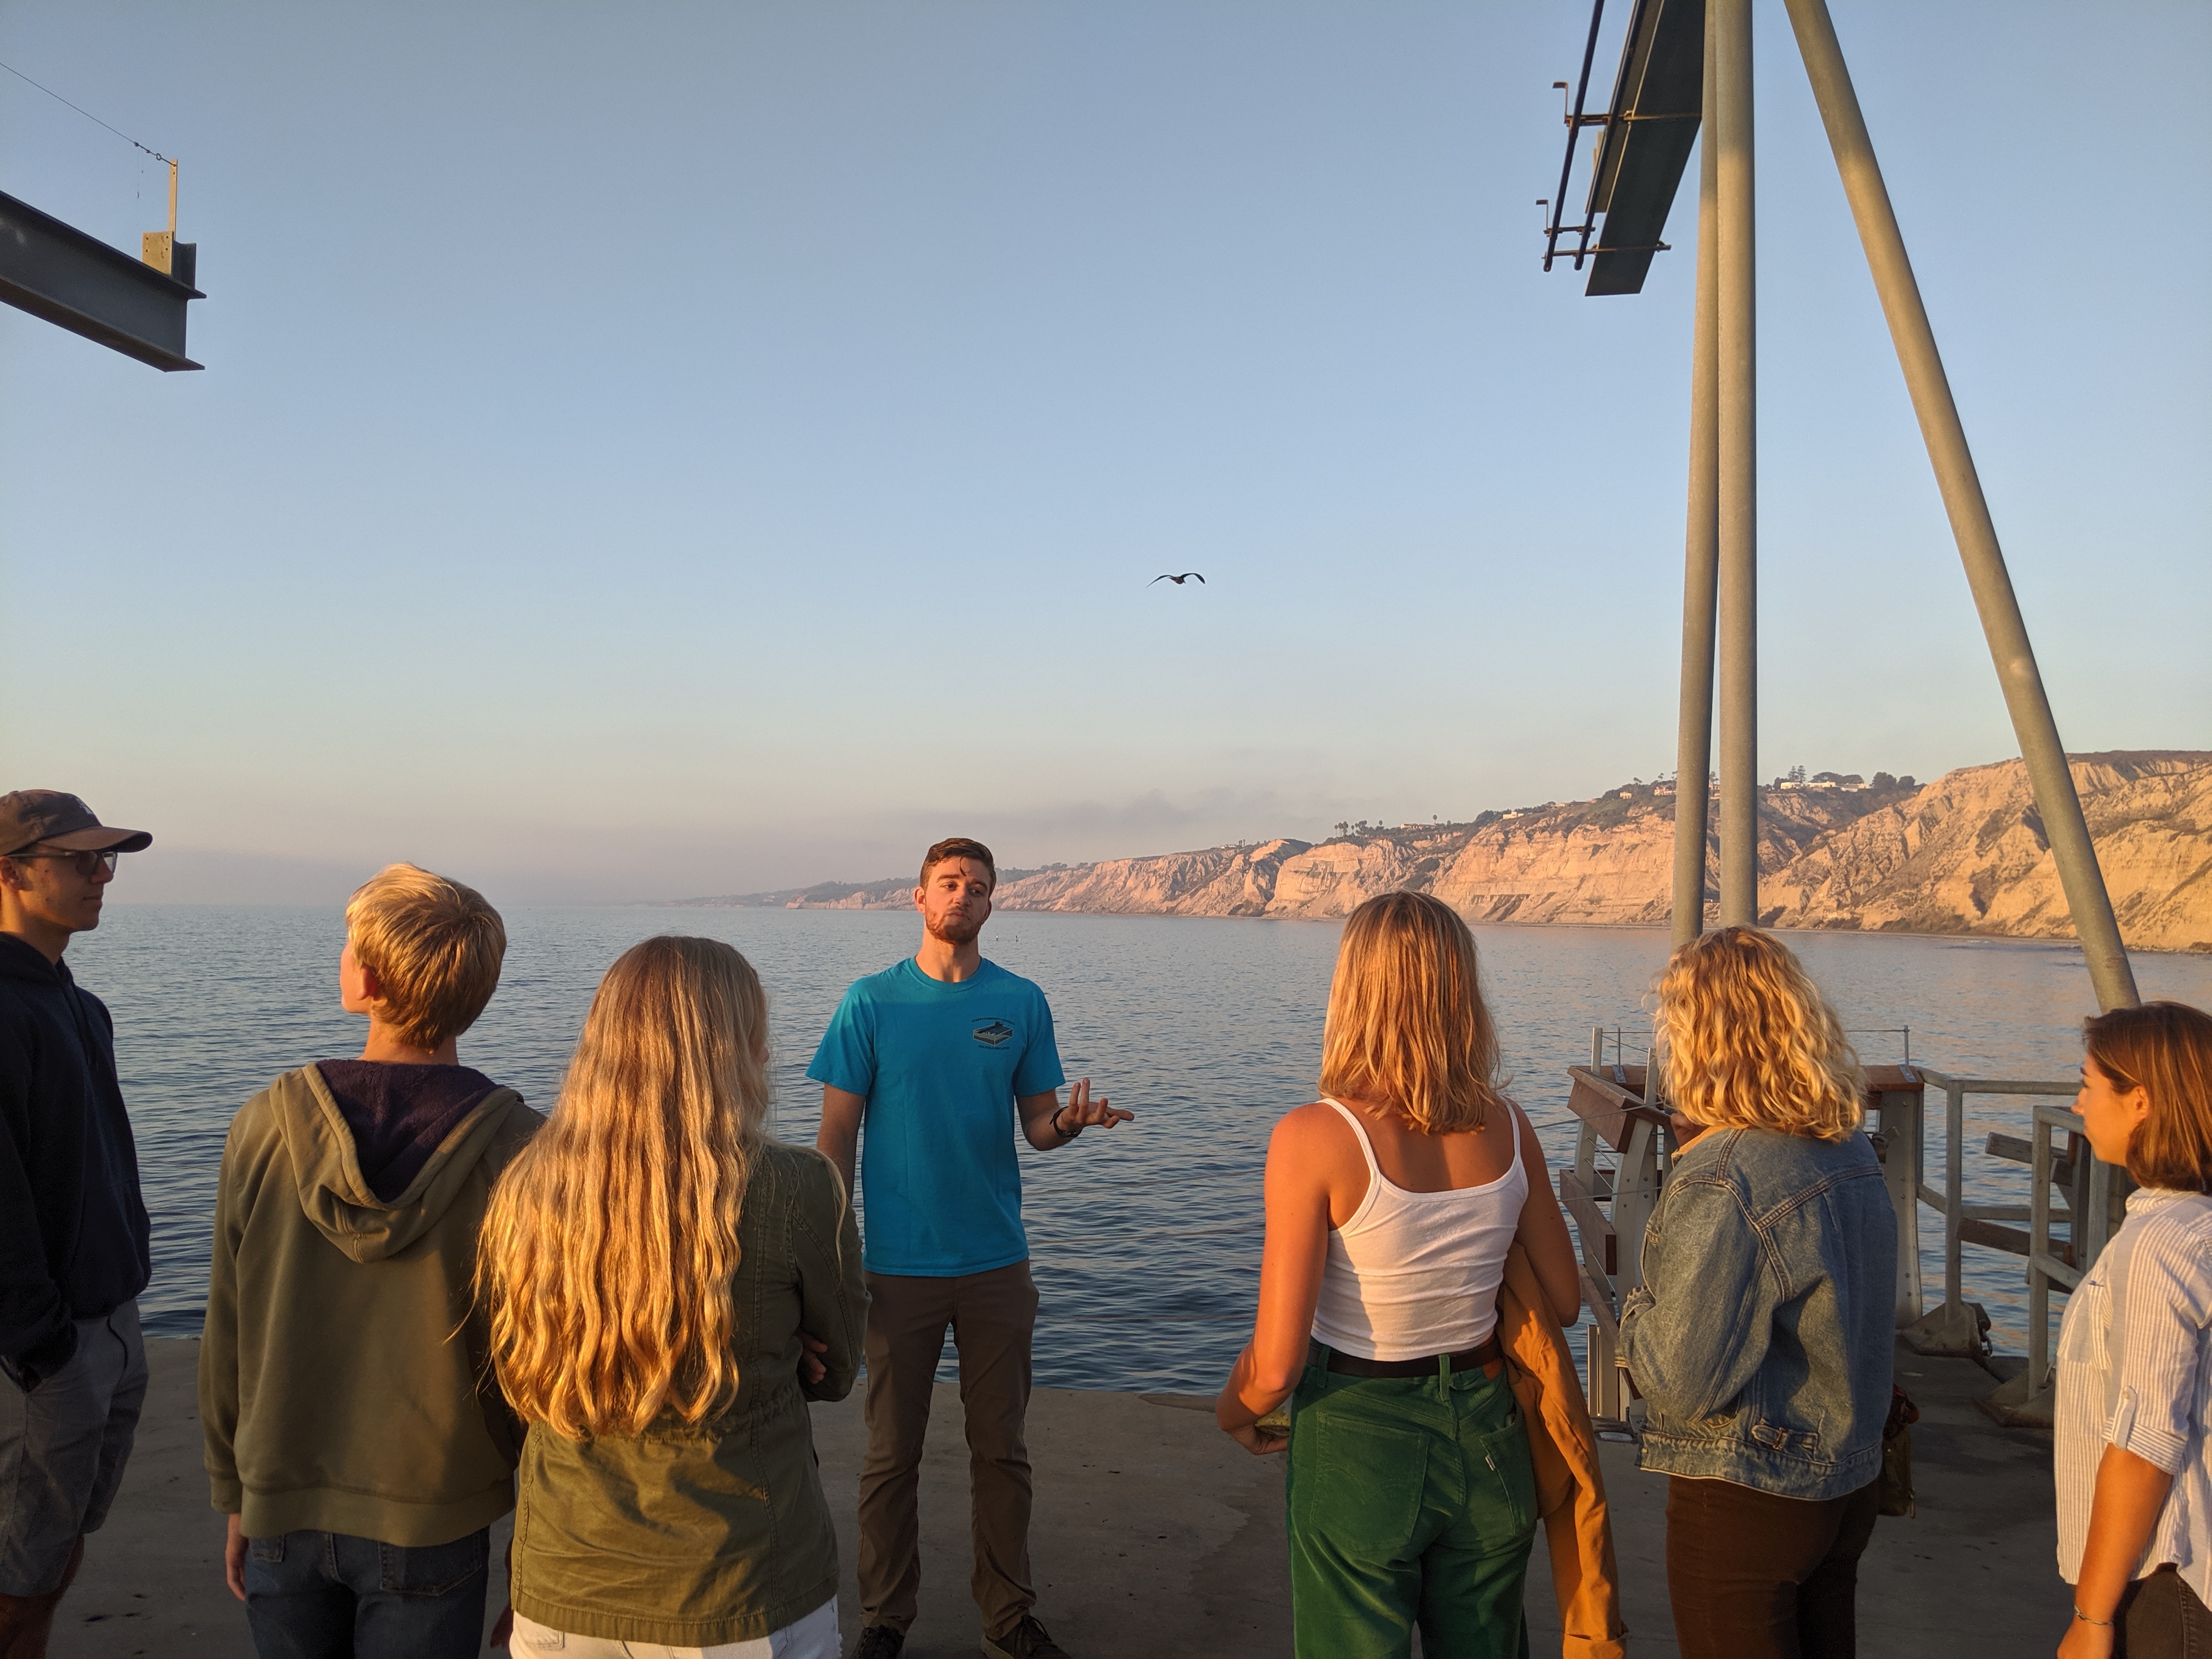 Scripps PhD candidate and previous SCOPE coordinator Wiley Wolfe leads students on a tour of the Ellen Browning Scripps Memorial Pier.